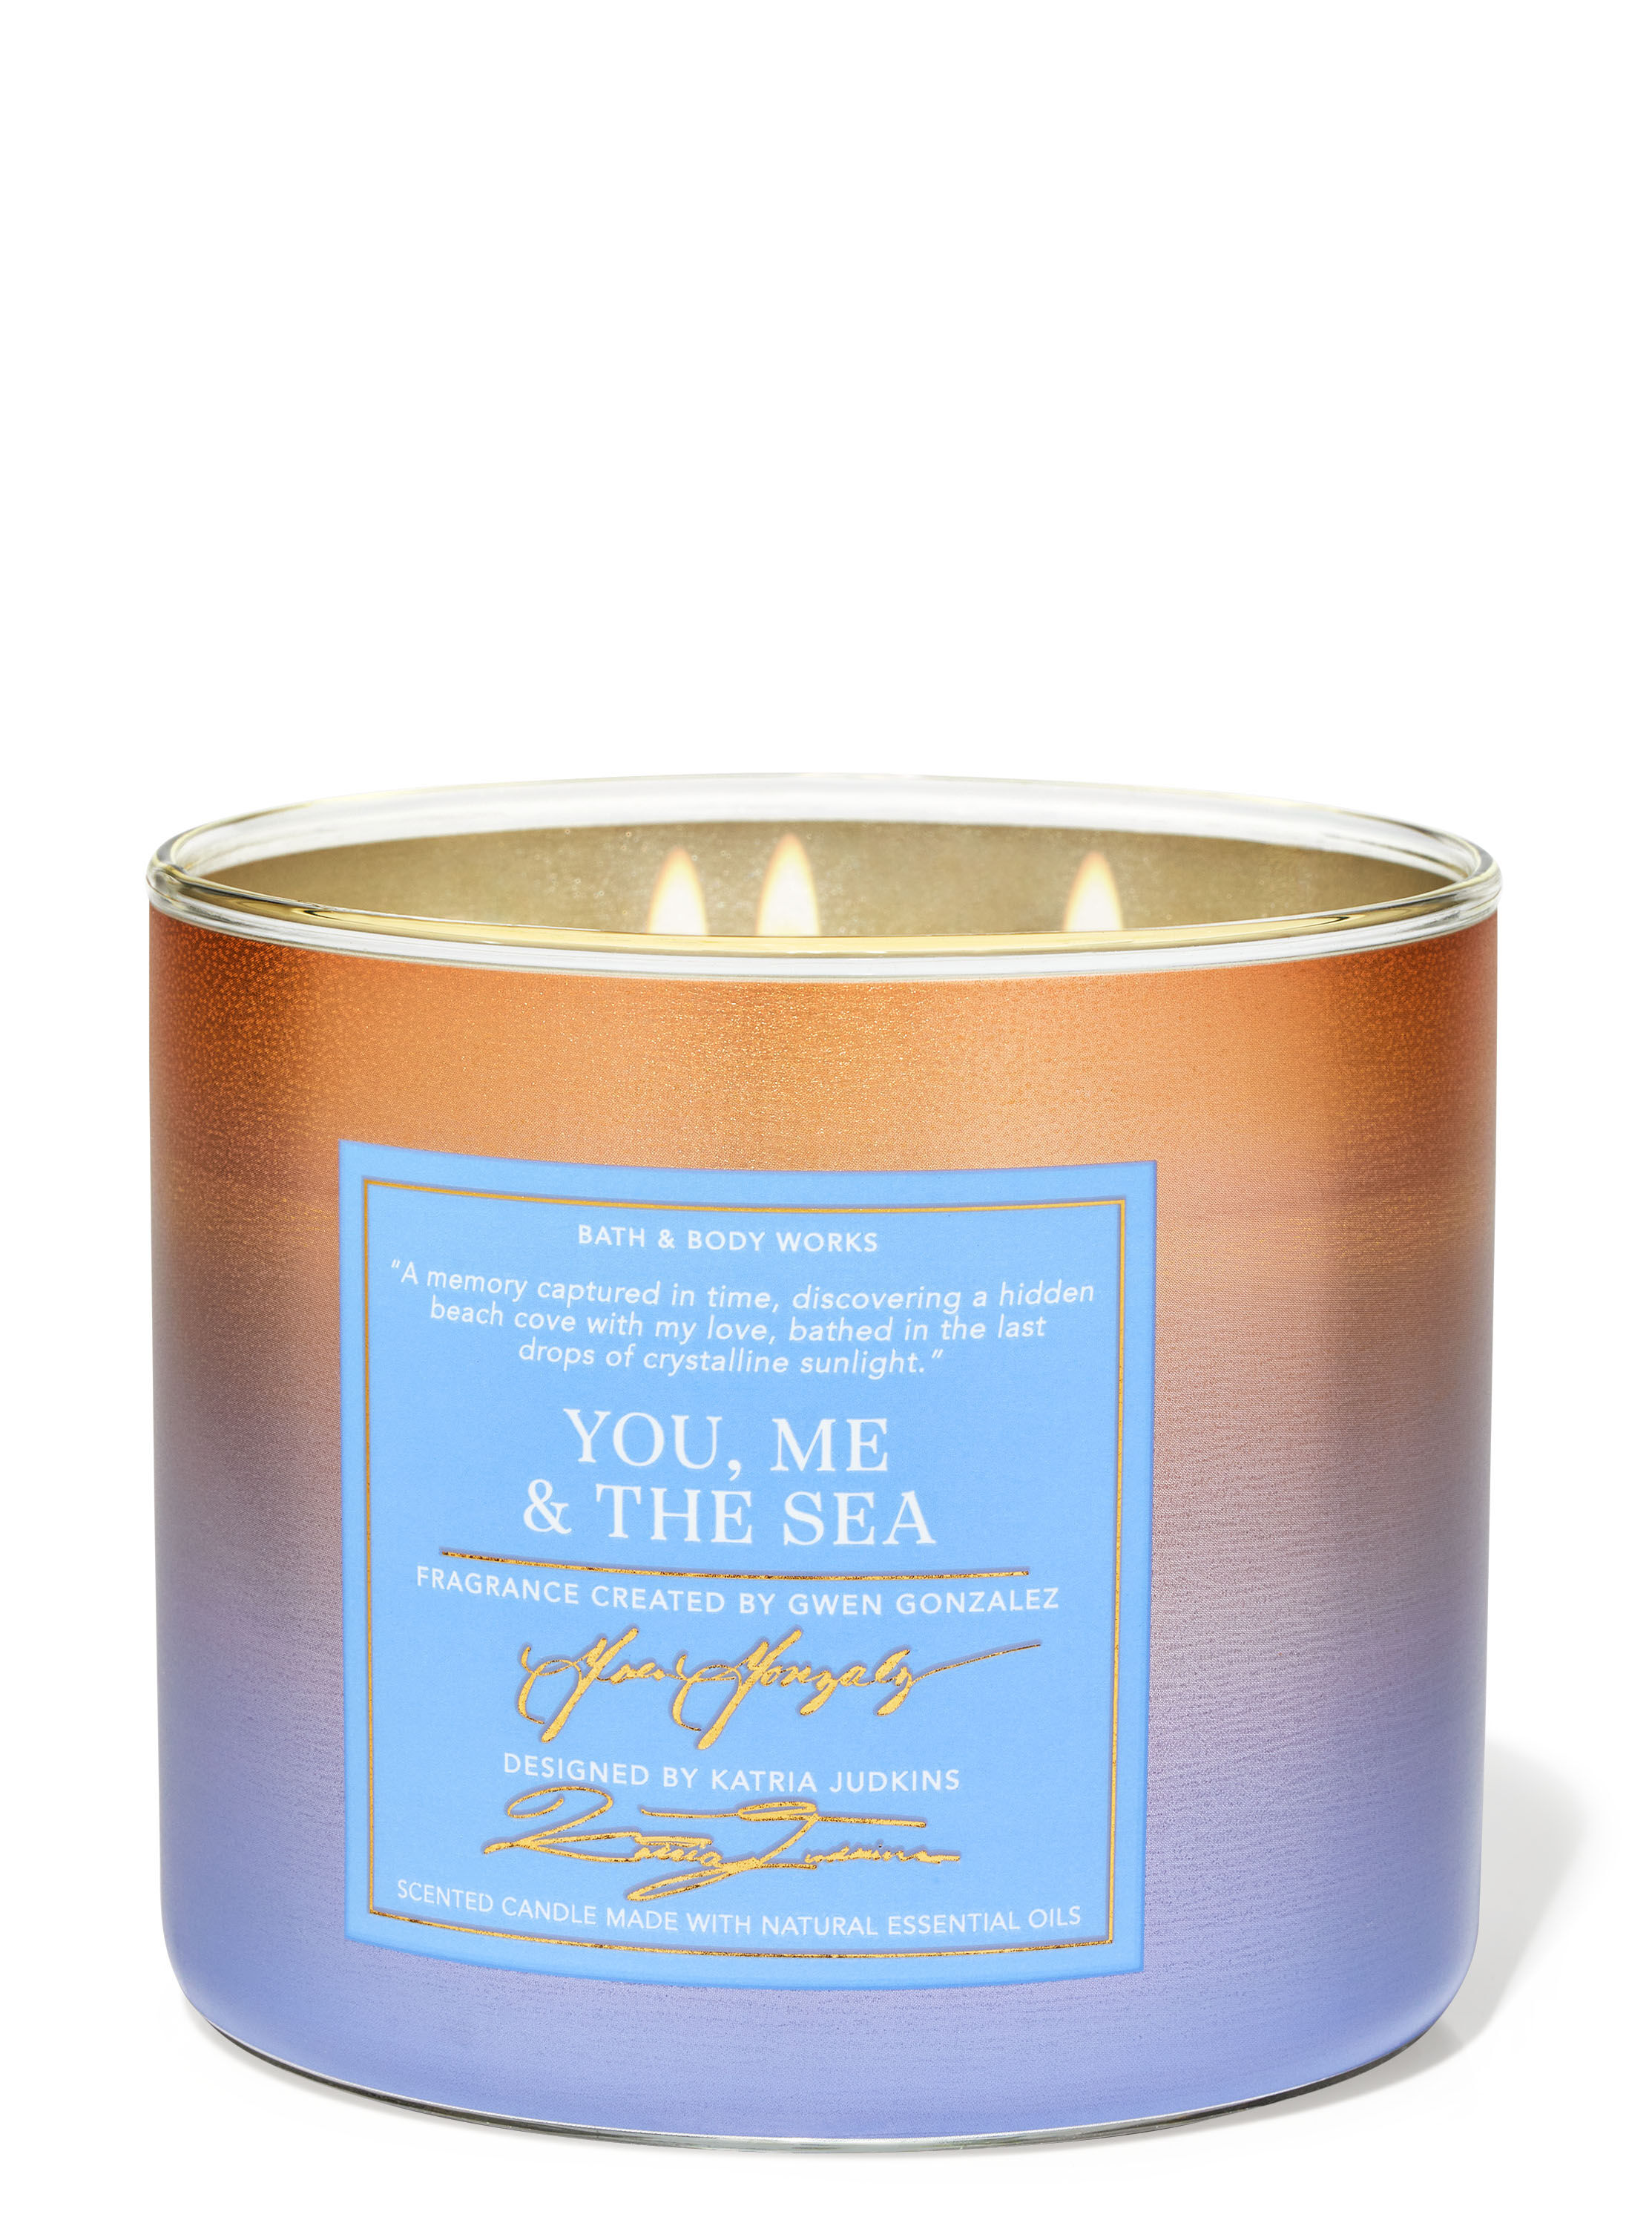 You, Me, & the Sea 3-Wick Candle